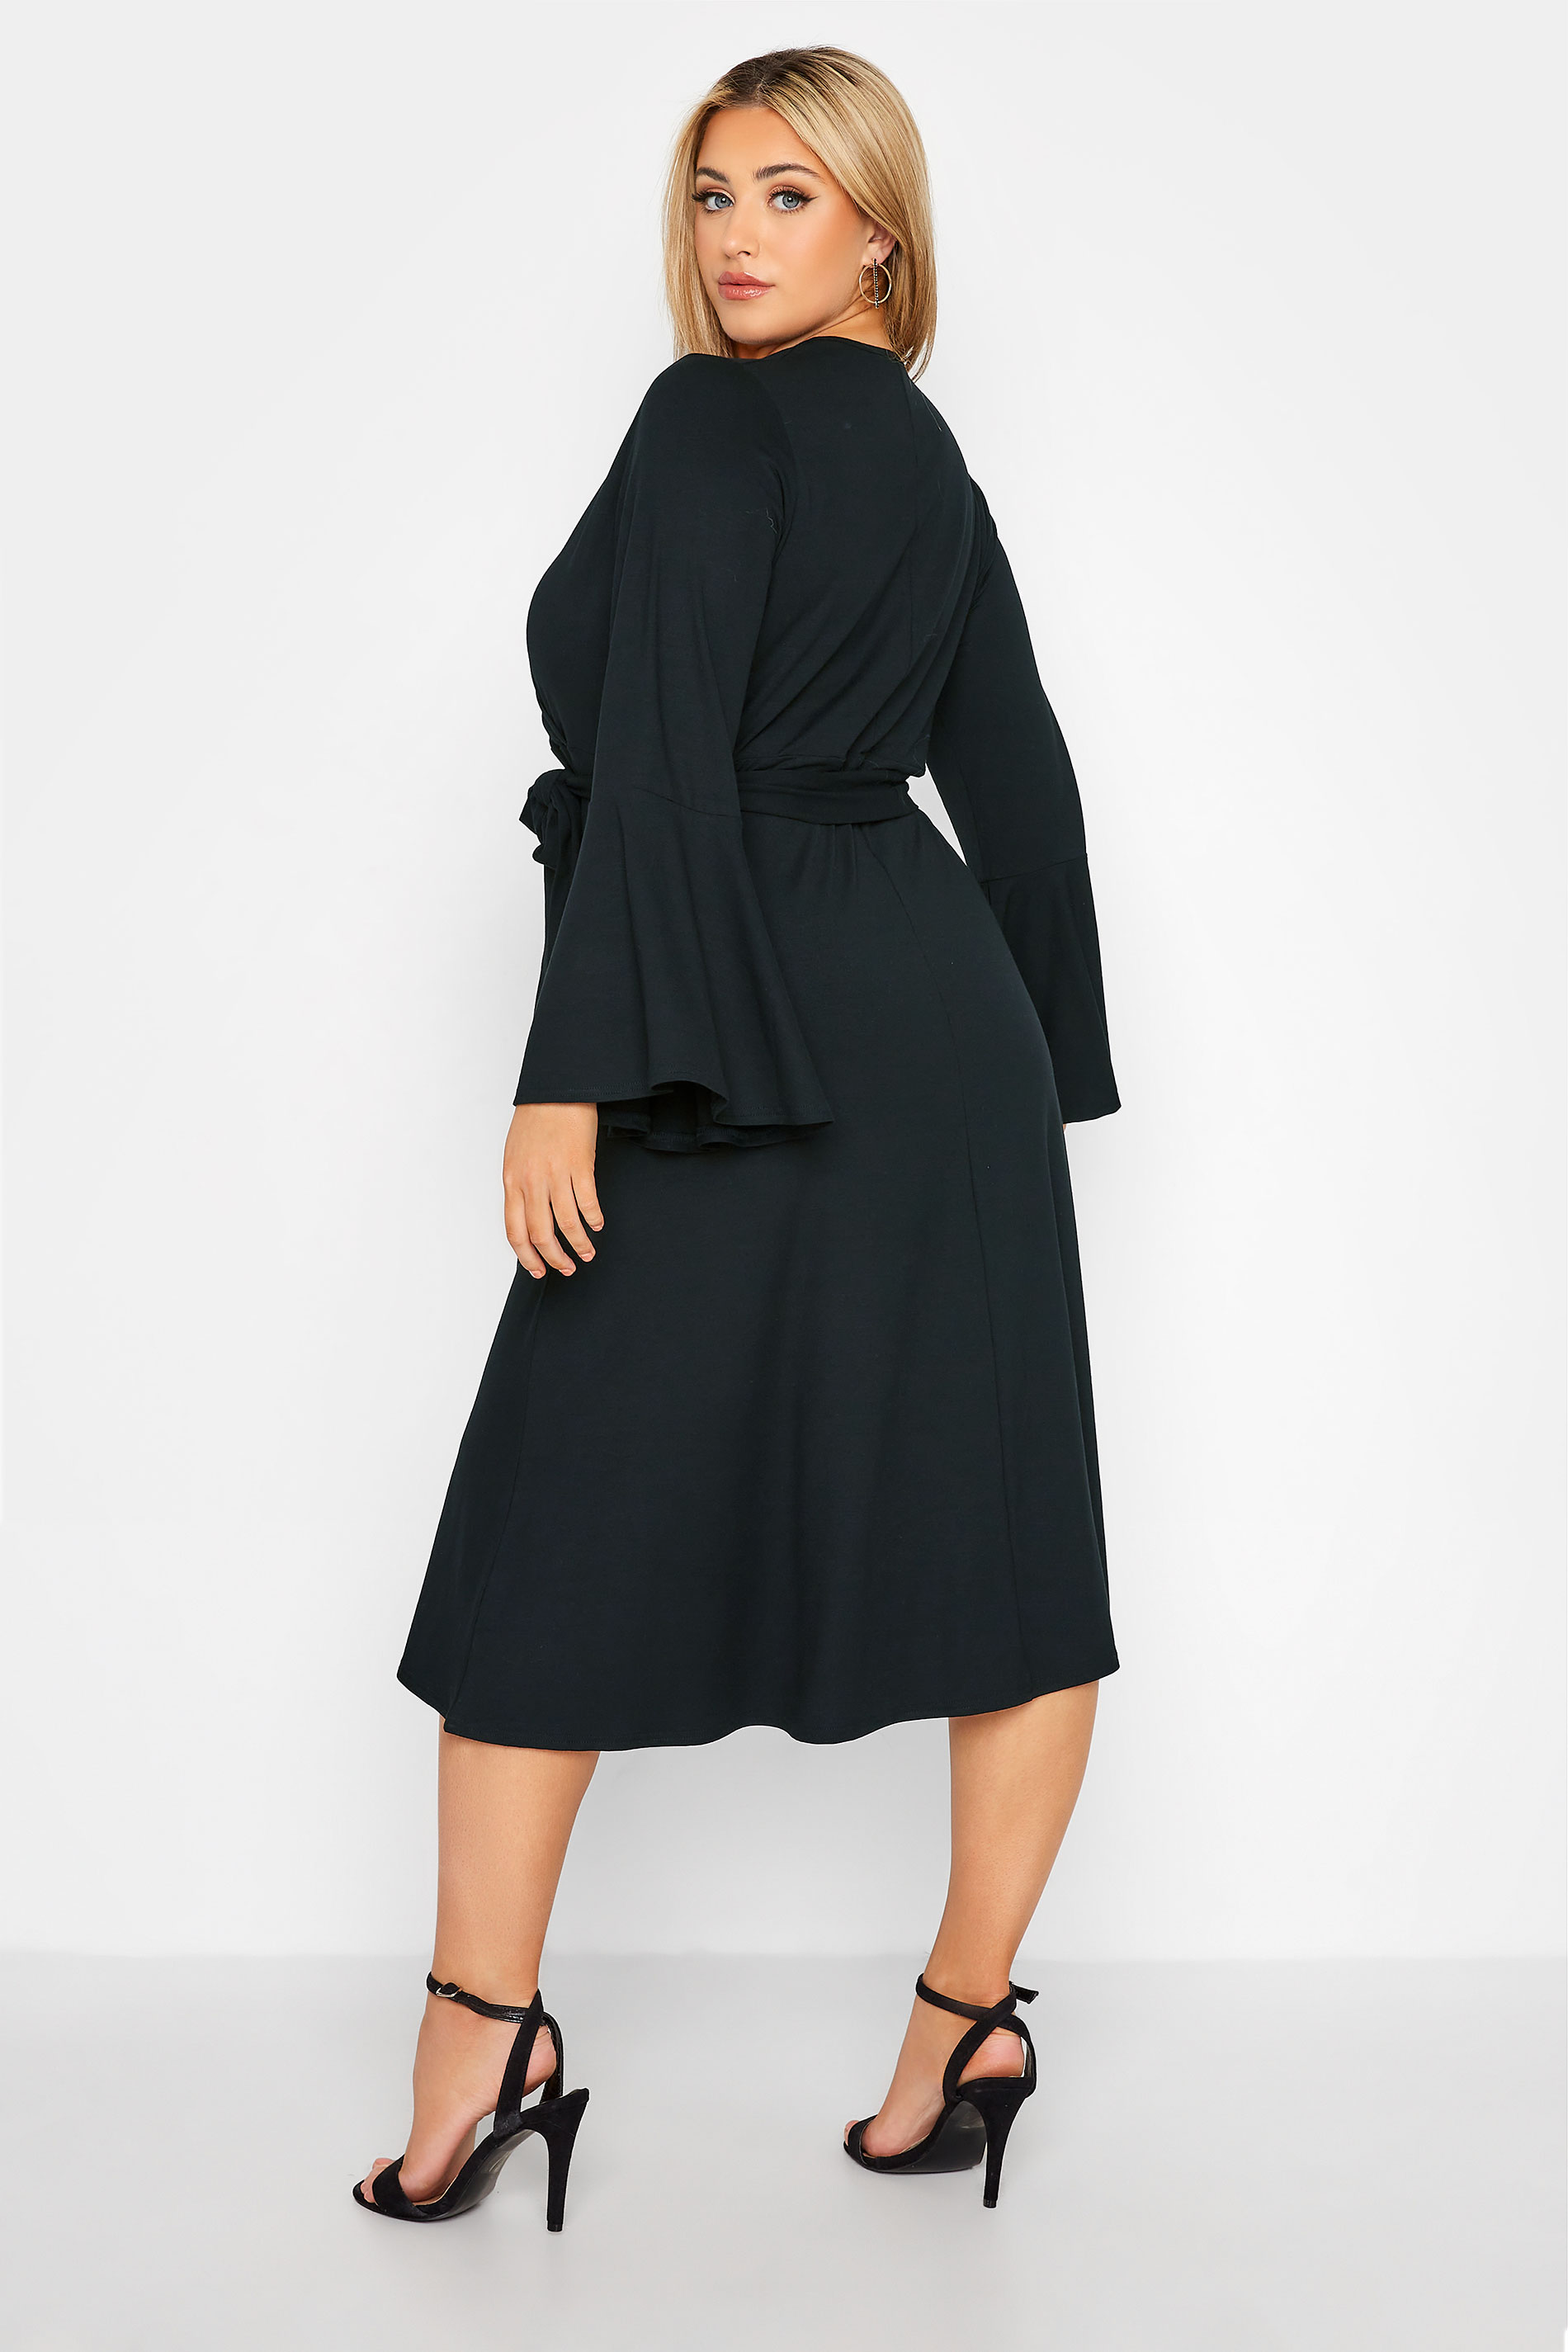 Robes Grande Taille Grande taille  Robes Portefeuilles | LIMITED COLLECTION - Robe Noire Style Portefeuille Volantée - IX24976